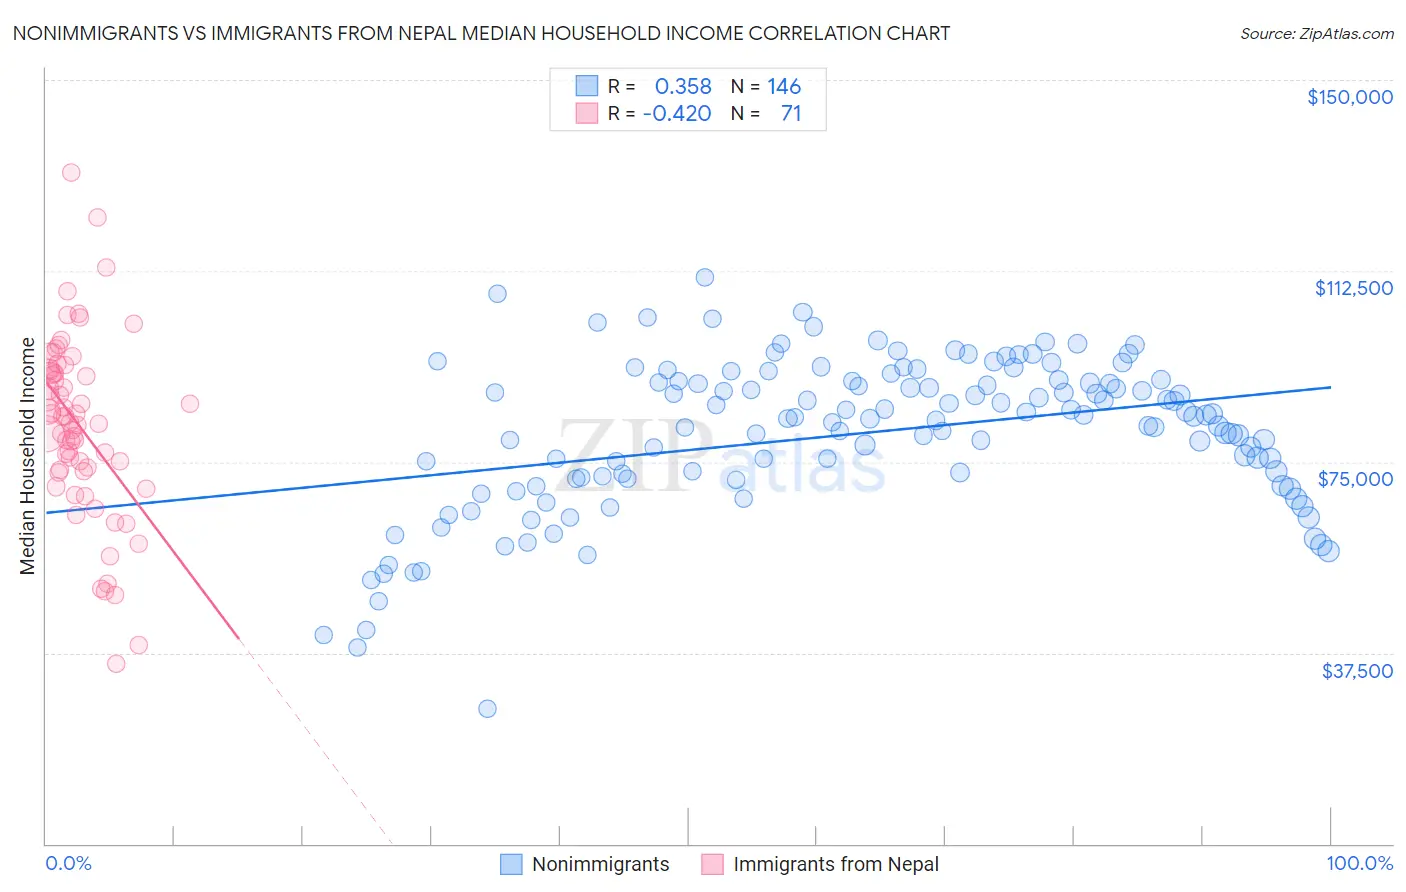 Nonimmigrants vs Immigrants from Nepal Median Household Income